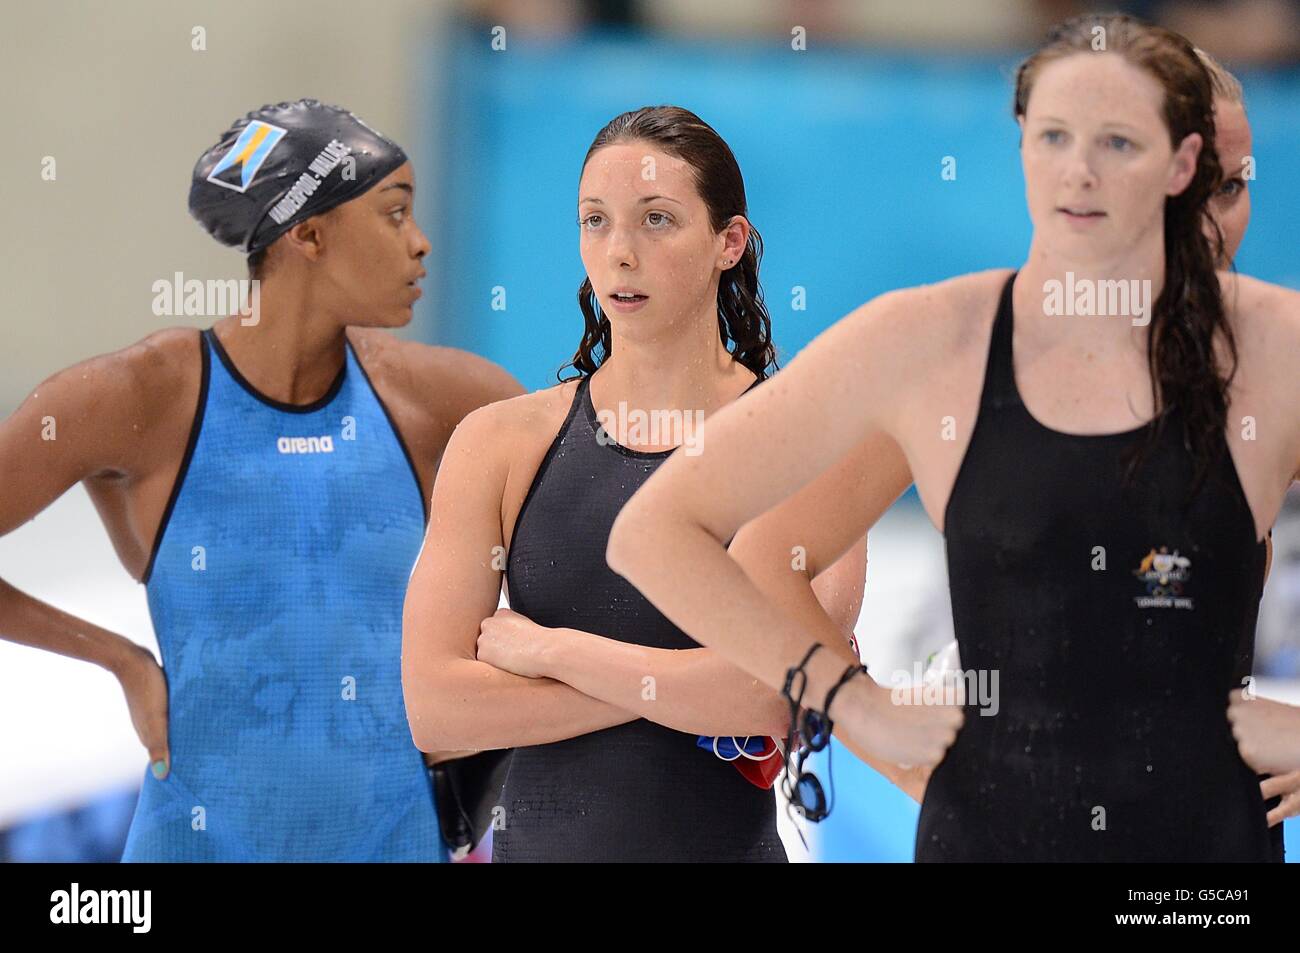 Great Britain's Amy Smith (centre) looks on at the results board following her swim in the Women's 50m Freestyle Semi Final 1 at the Aquatics Centre in the Olympic Park, London, on the seventh day of the London 2012 Olympics. Stock Photo